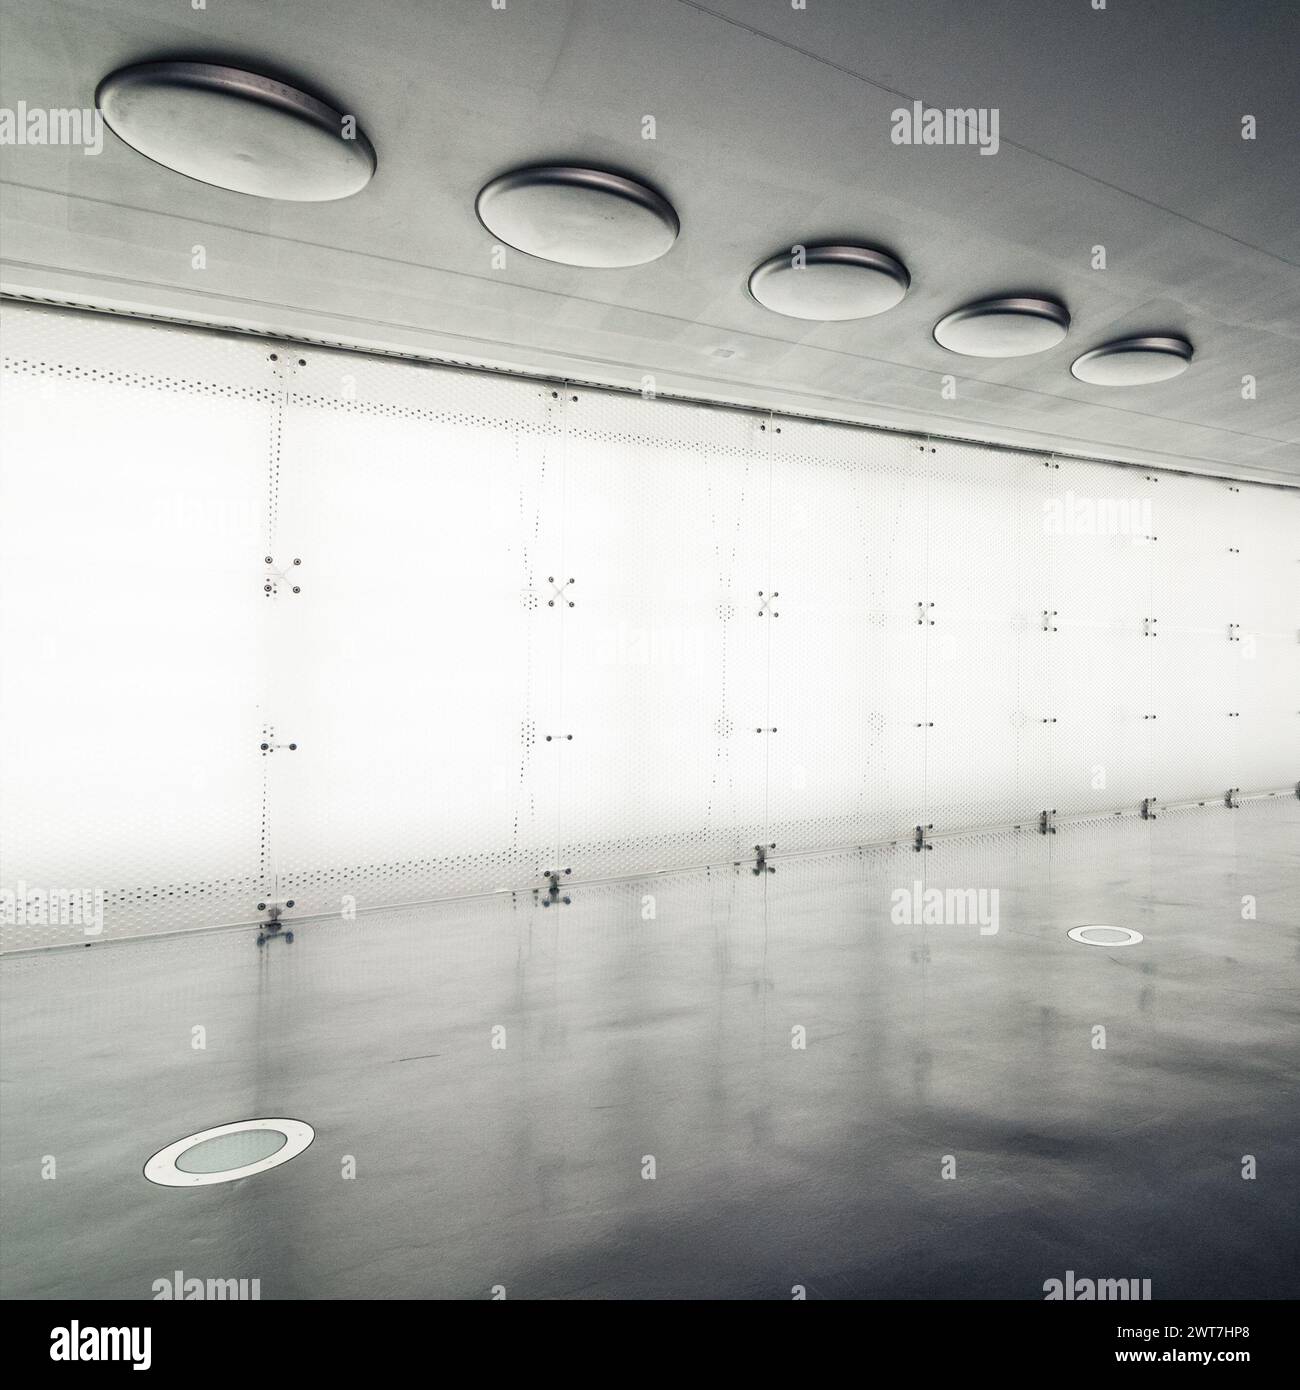 Empty room illuminated wall and silver-colored ceiling. The floor is grey and ceiling has round portholes in it. Empty retrofuturistic interior. Stock Photo